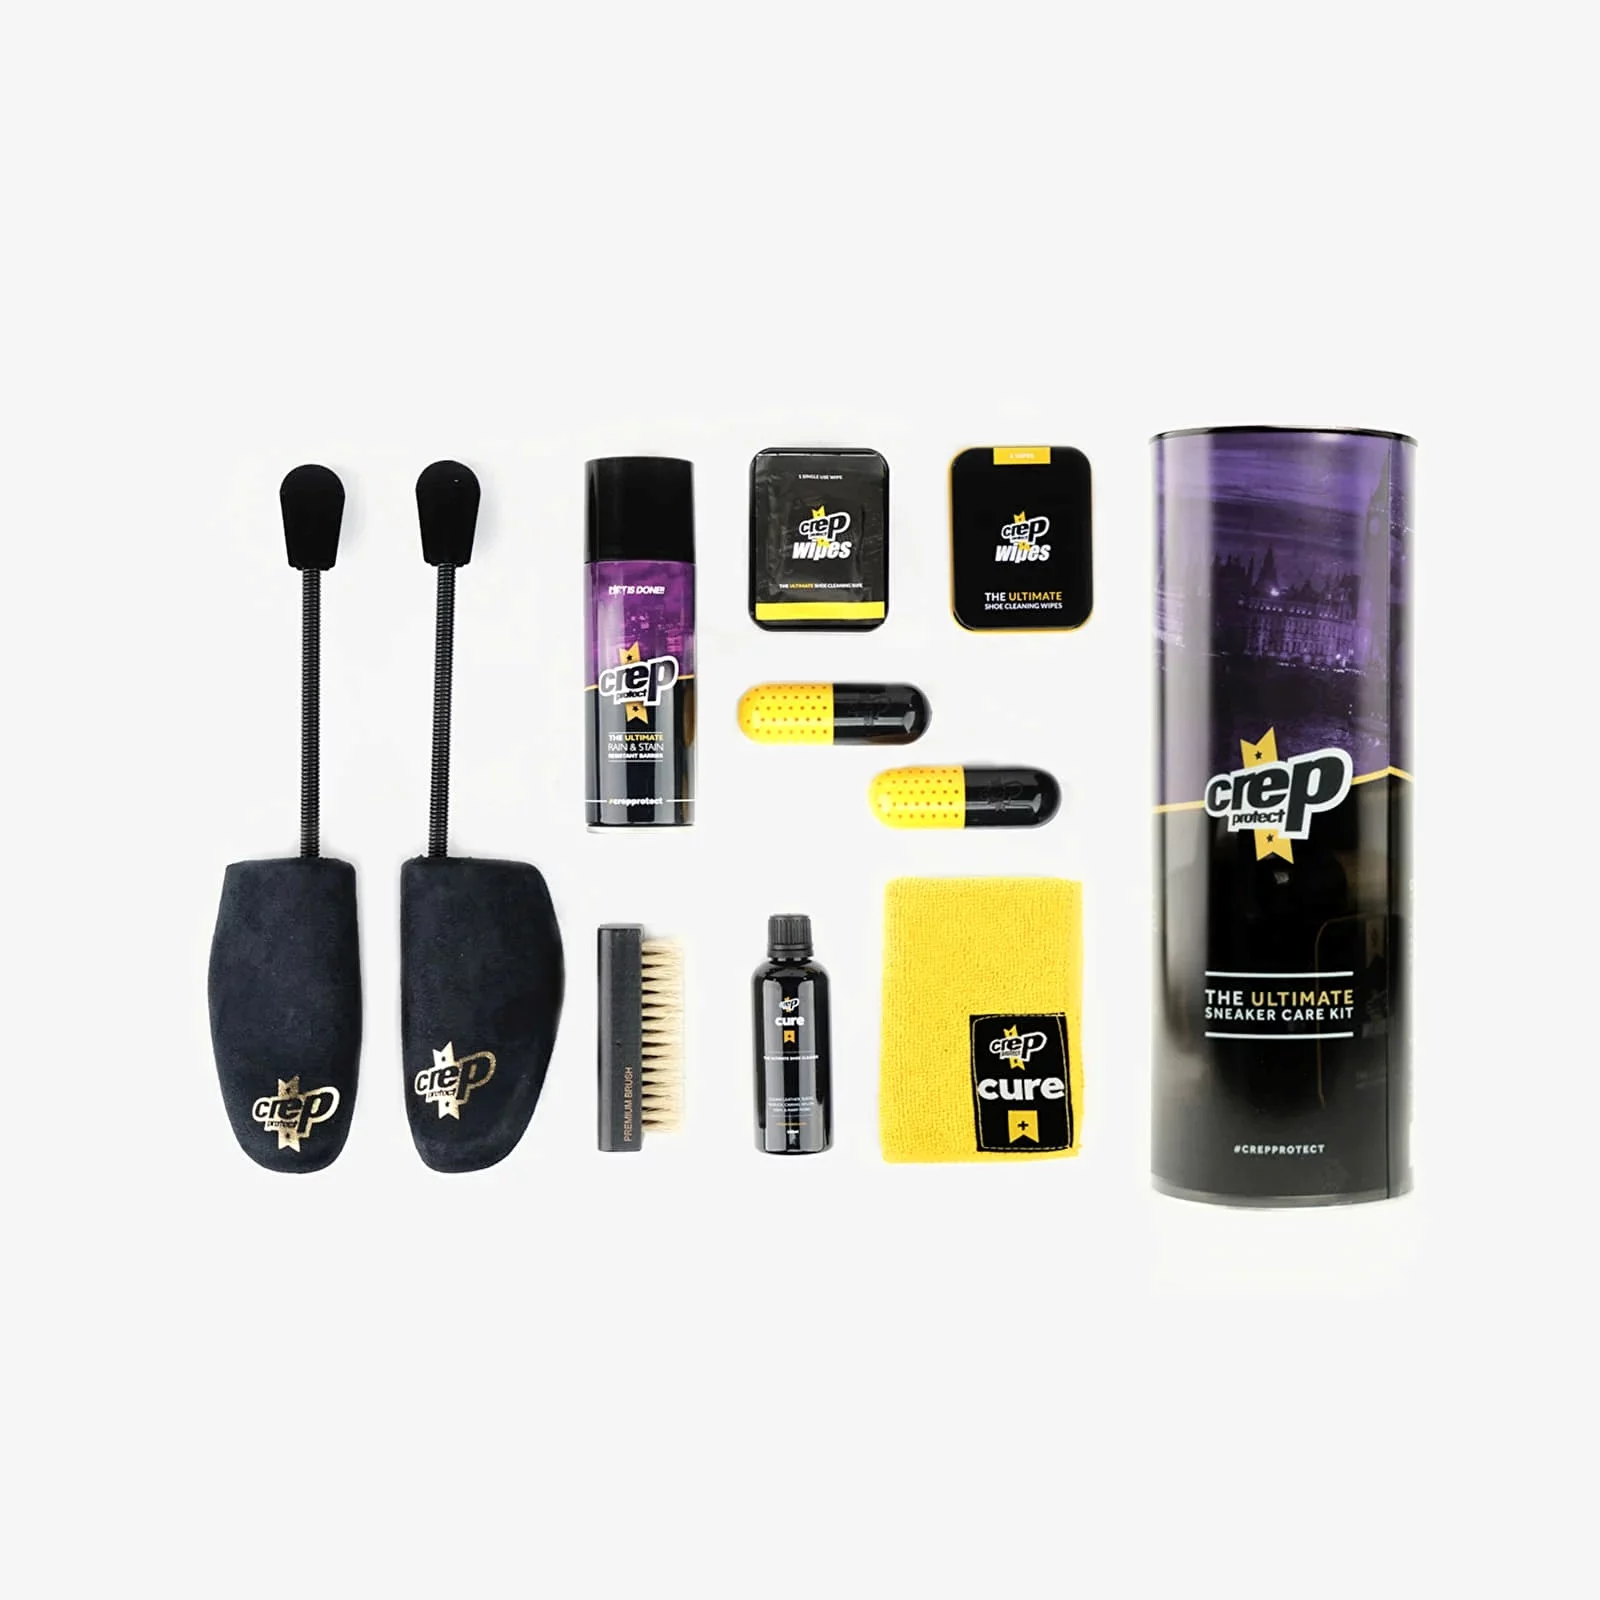 Accessoires Crep Protect The Ultimate Sneake Care Kit